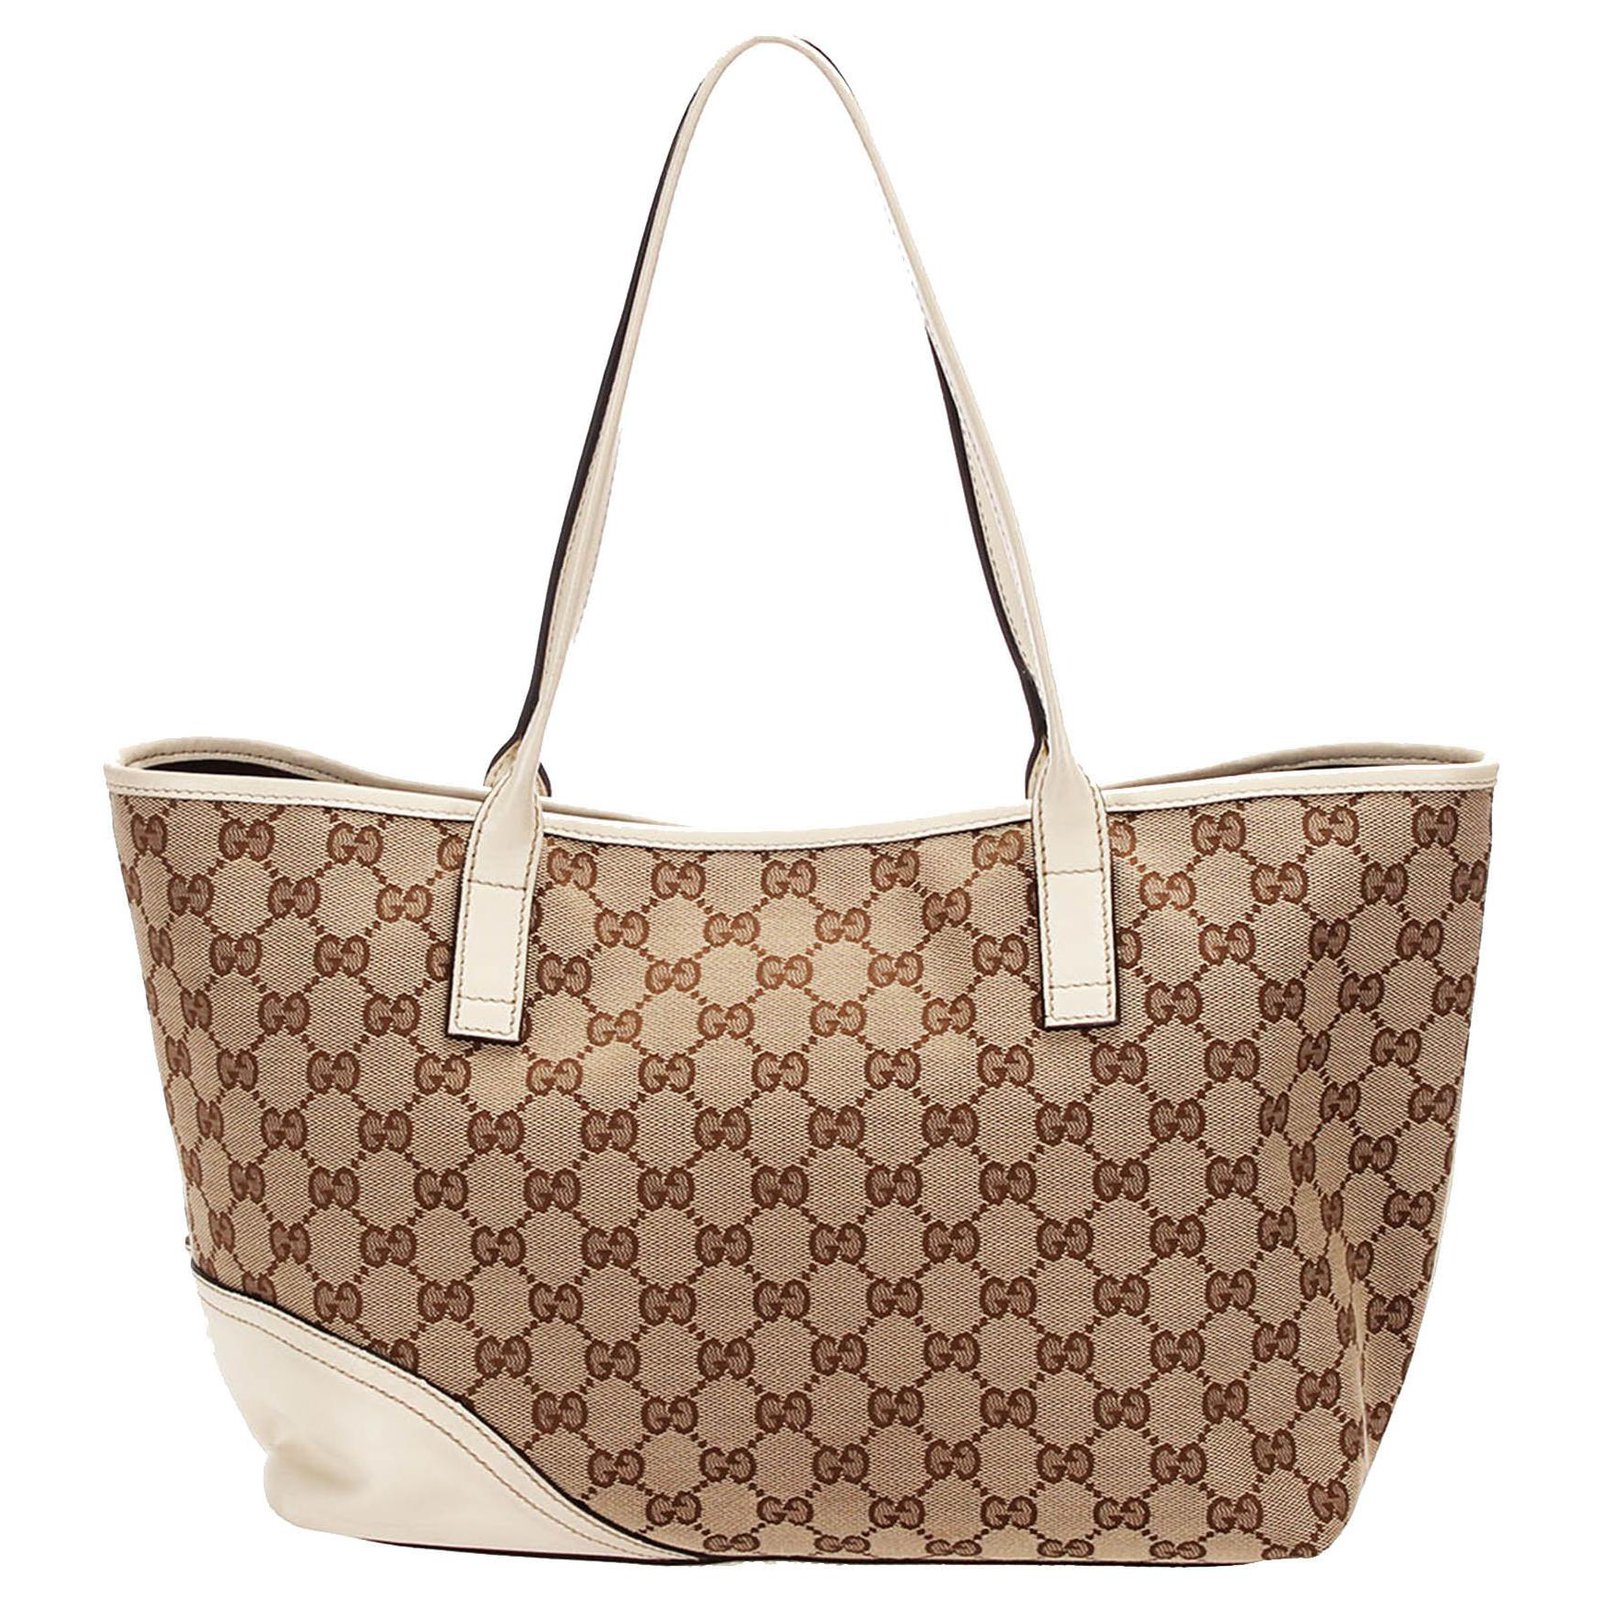 Gucci GG Canvas 141472 Unisex GG Canvas,Leather Tote Bag Beige